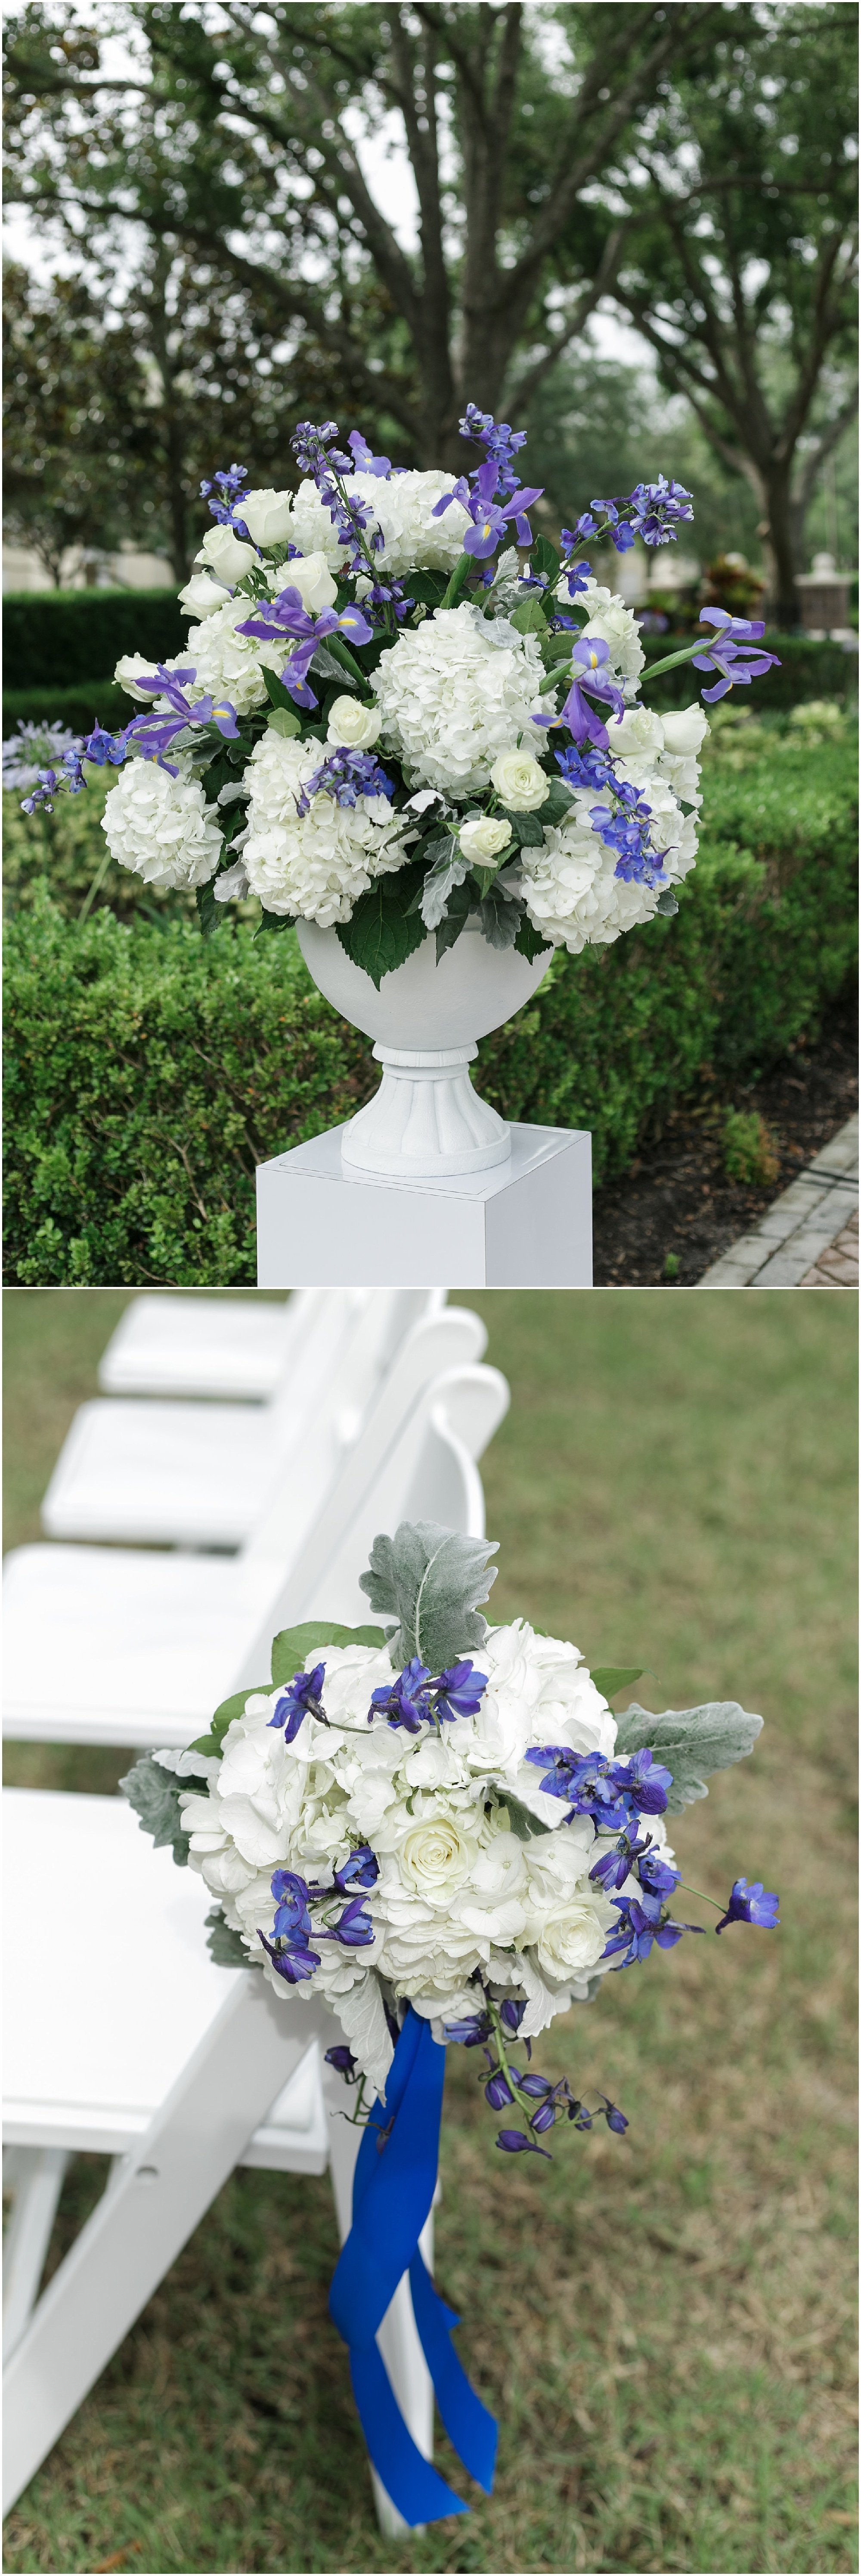 Floral wedding decor for outdoor ceremony at Reunion Resort